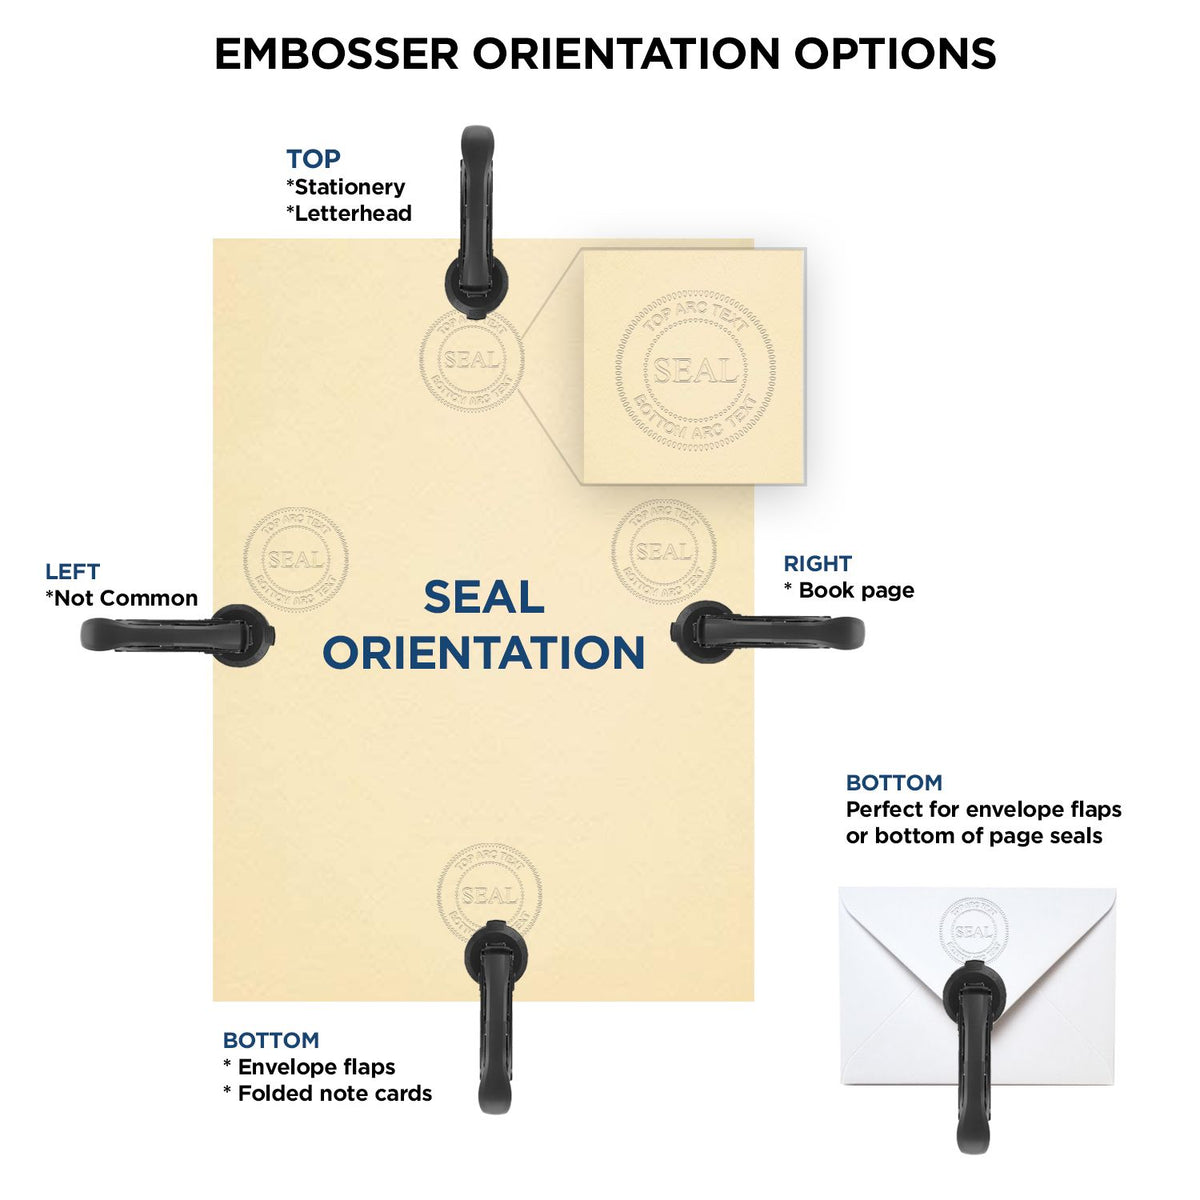 An infographic for the Heavy Duty Cast Iron Nebraska Geologist Seal Embosser showing embosser orientation, this is showing examples of a top, bottom, right and left insert.